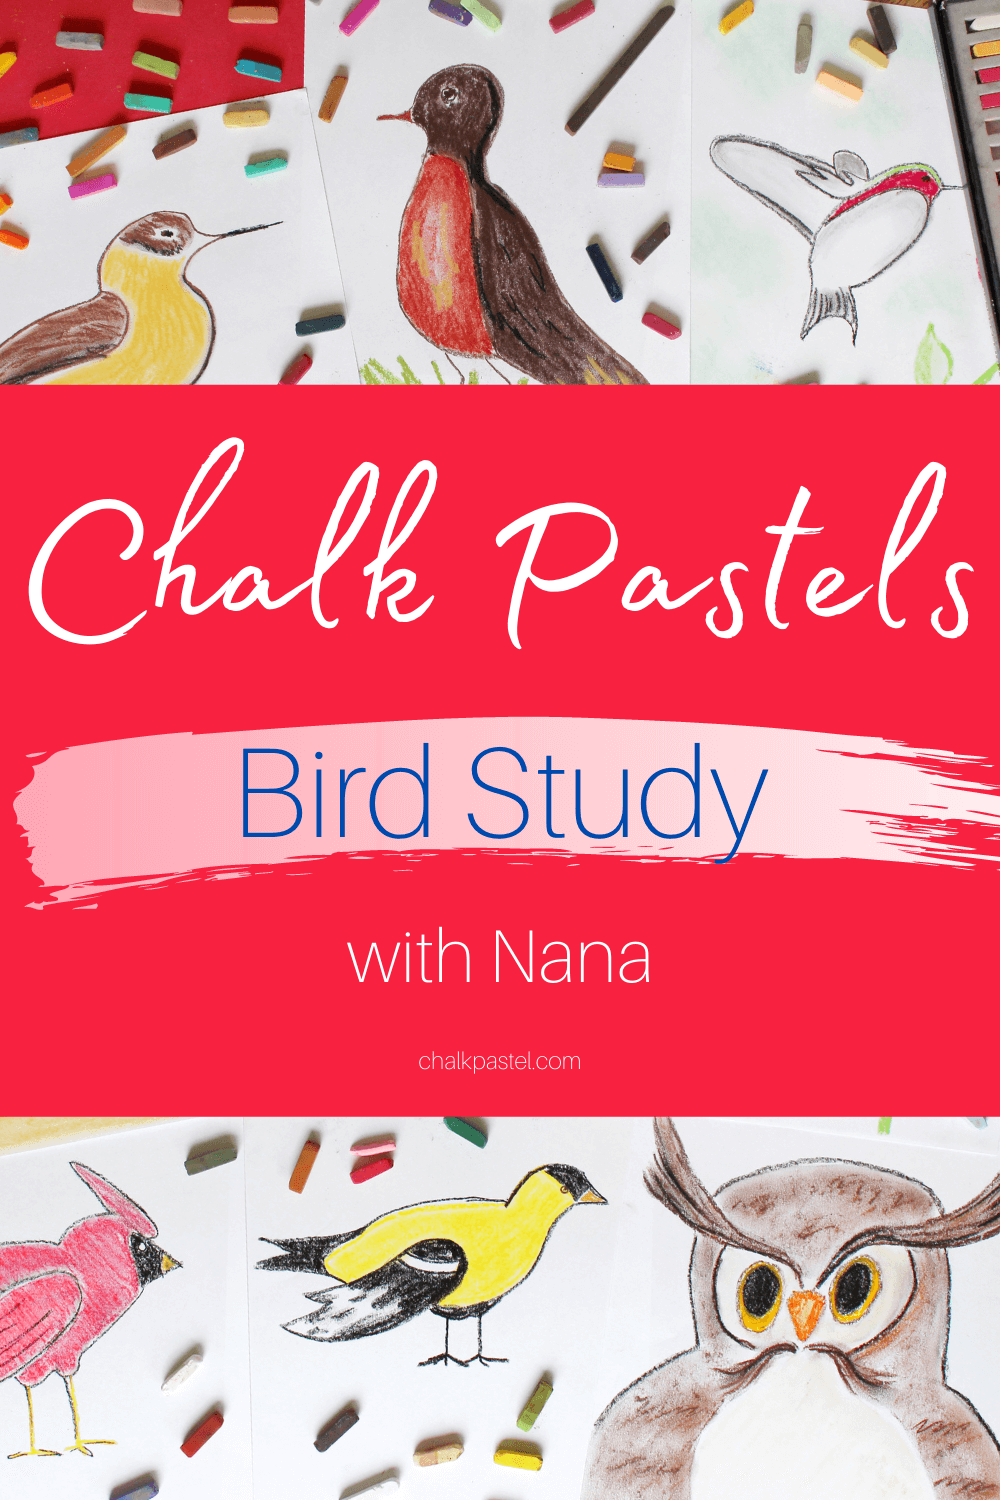 Chalk Pastels Bird Study with Nana: A chalk pastels bird study with Nana is a wonderful way to introduce bird art lessons to your kids. Chalk pastels are perfect for preschoolers to adults. They are super easy to use with no long art supply list needed. You'll love adding these vibrant birds to your next nature study or in preparation for the Great Backyard Bird Count! #chalkpastels #YouAREAnArtist #birdartlessons #birdartlessonsforkids #birdnaturestudy #backyardbirds #birdlessons #ChalkPastelsBirdStudywithNana